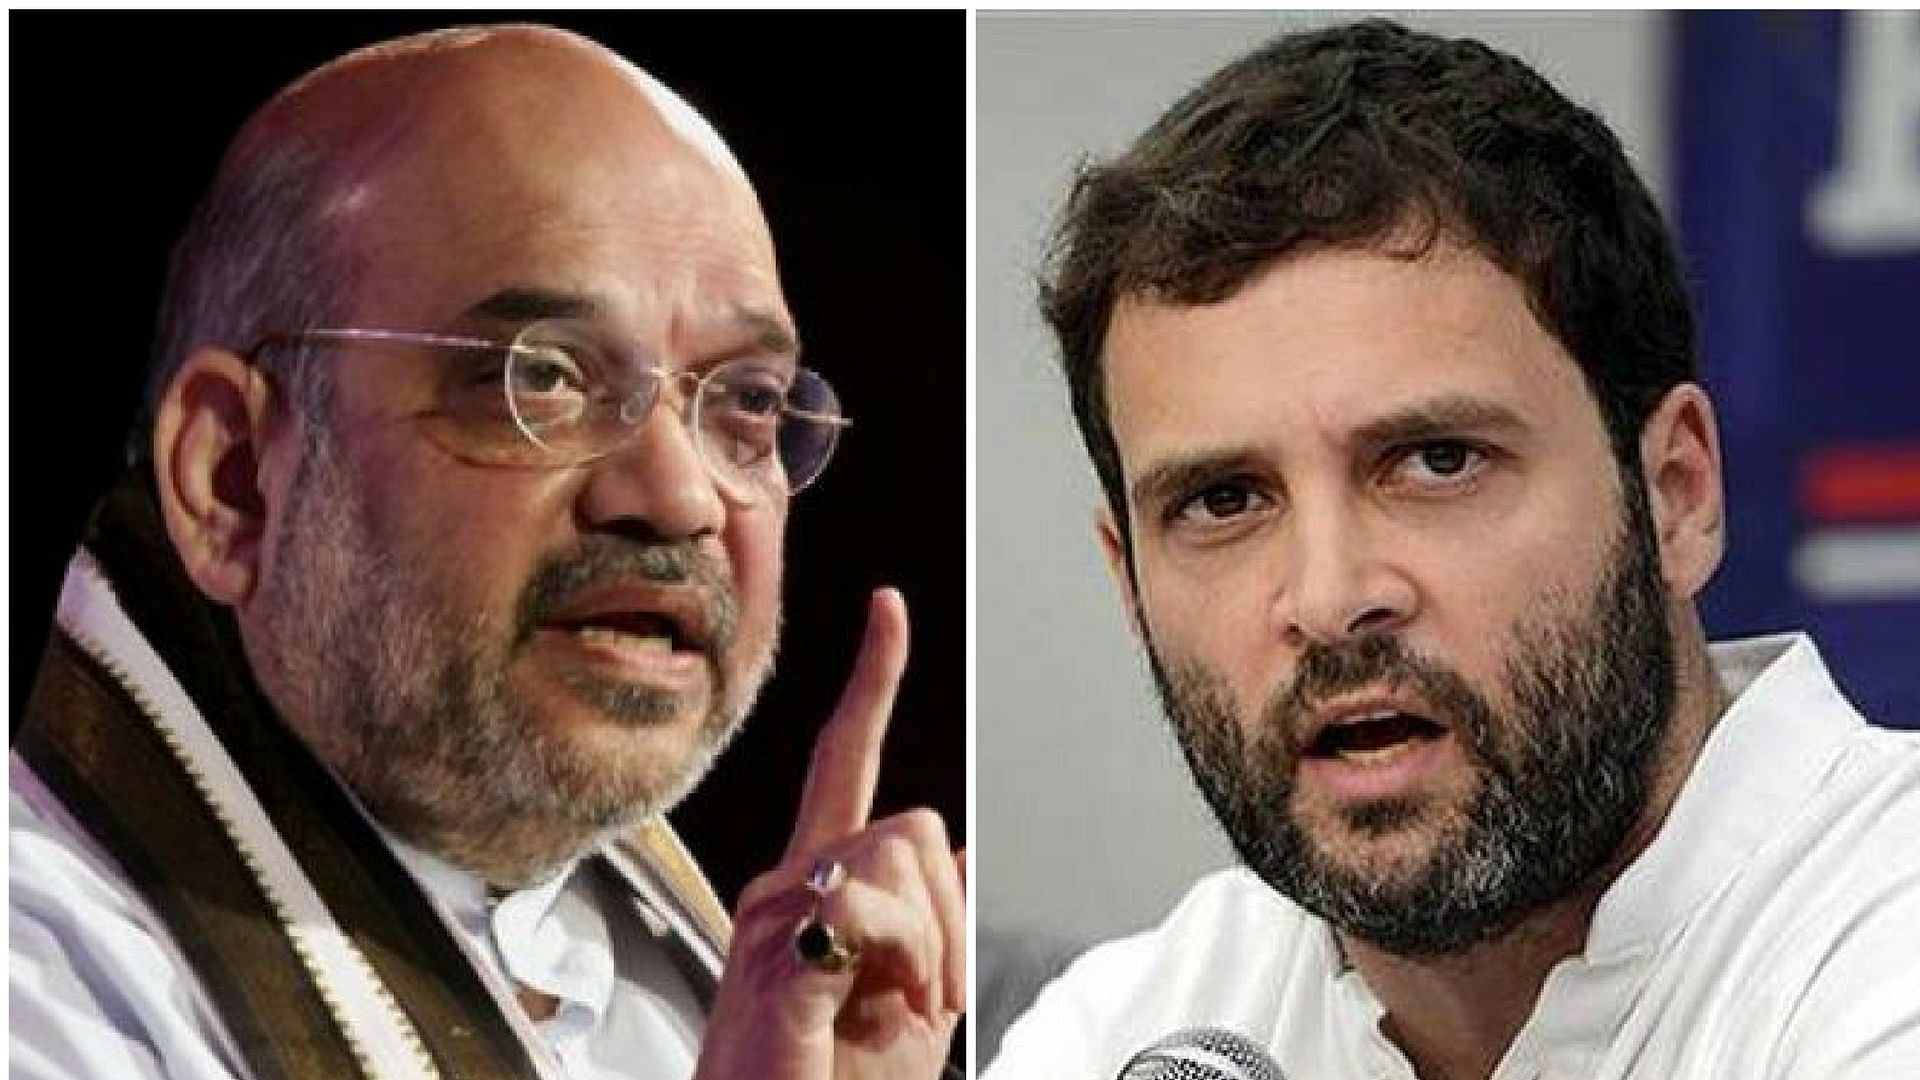 Amit Shah wasted no time in hitting back at Rahul Gandhi on Twitter, reminding him of the Congress’ “glorious history”.